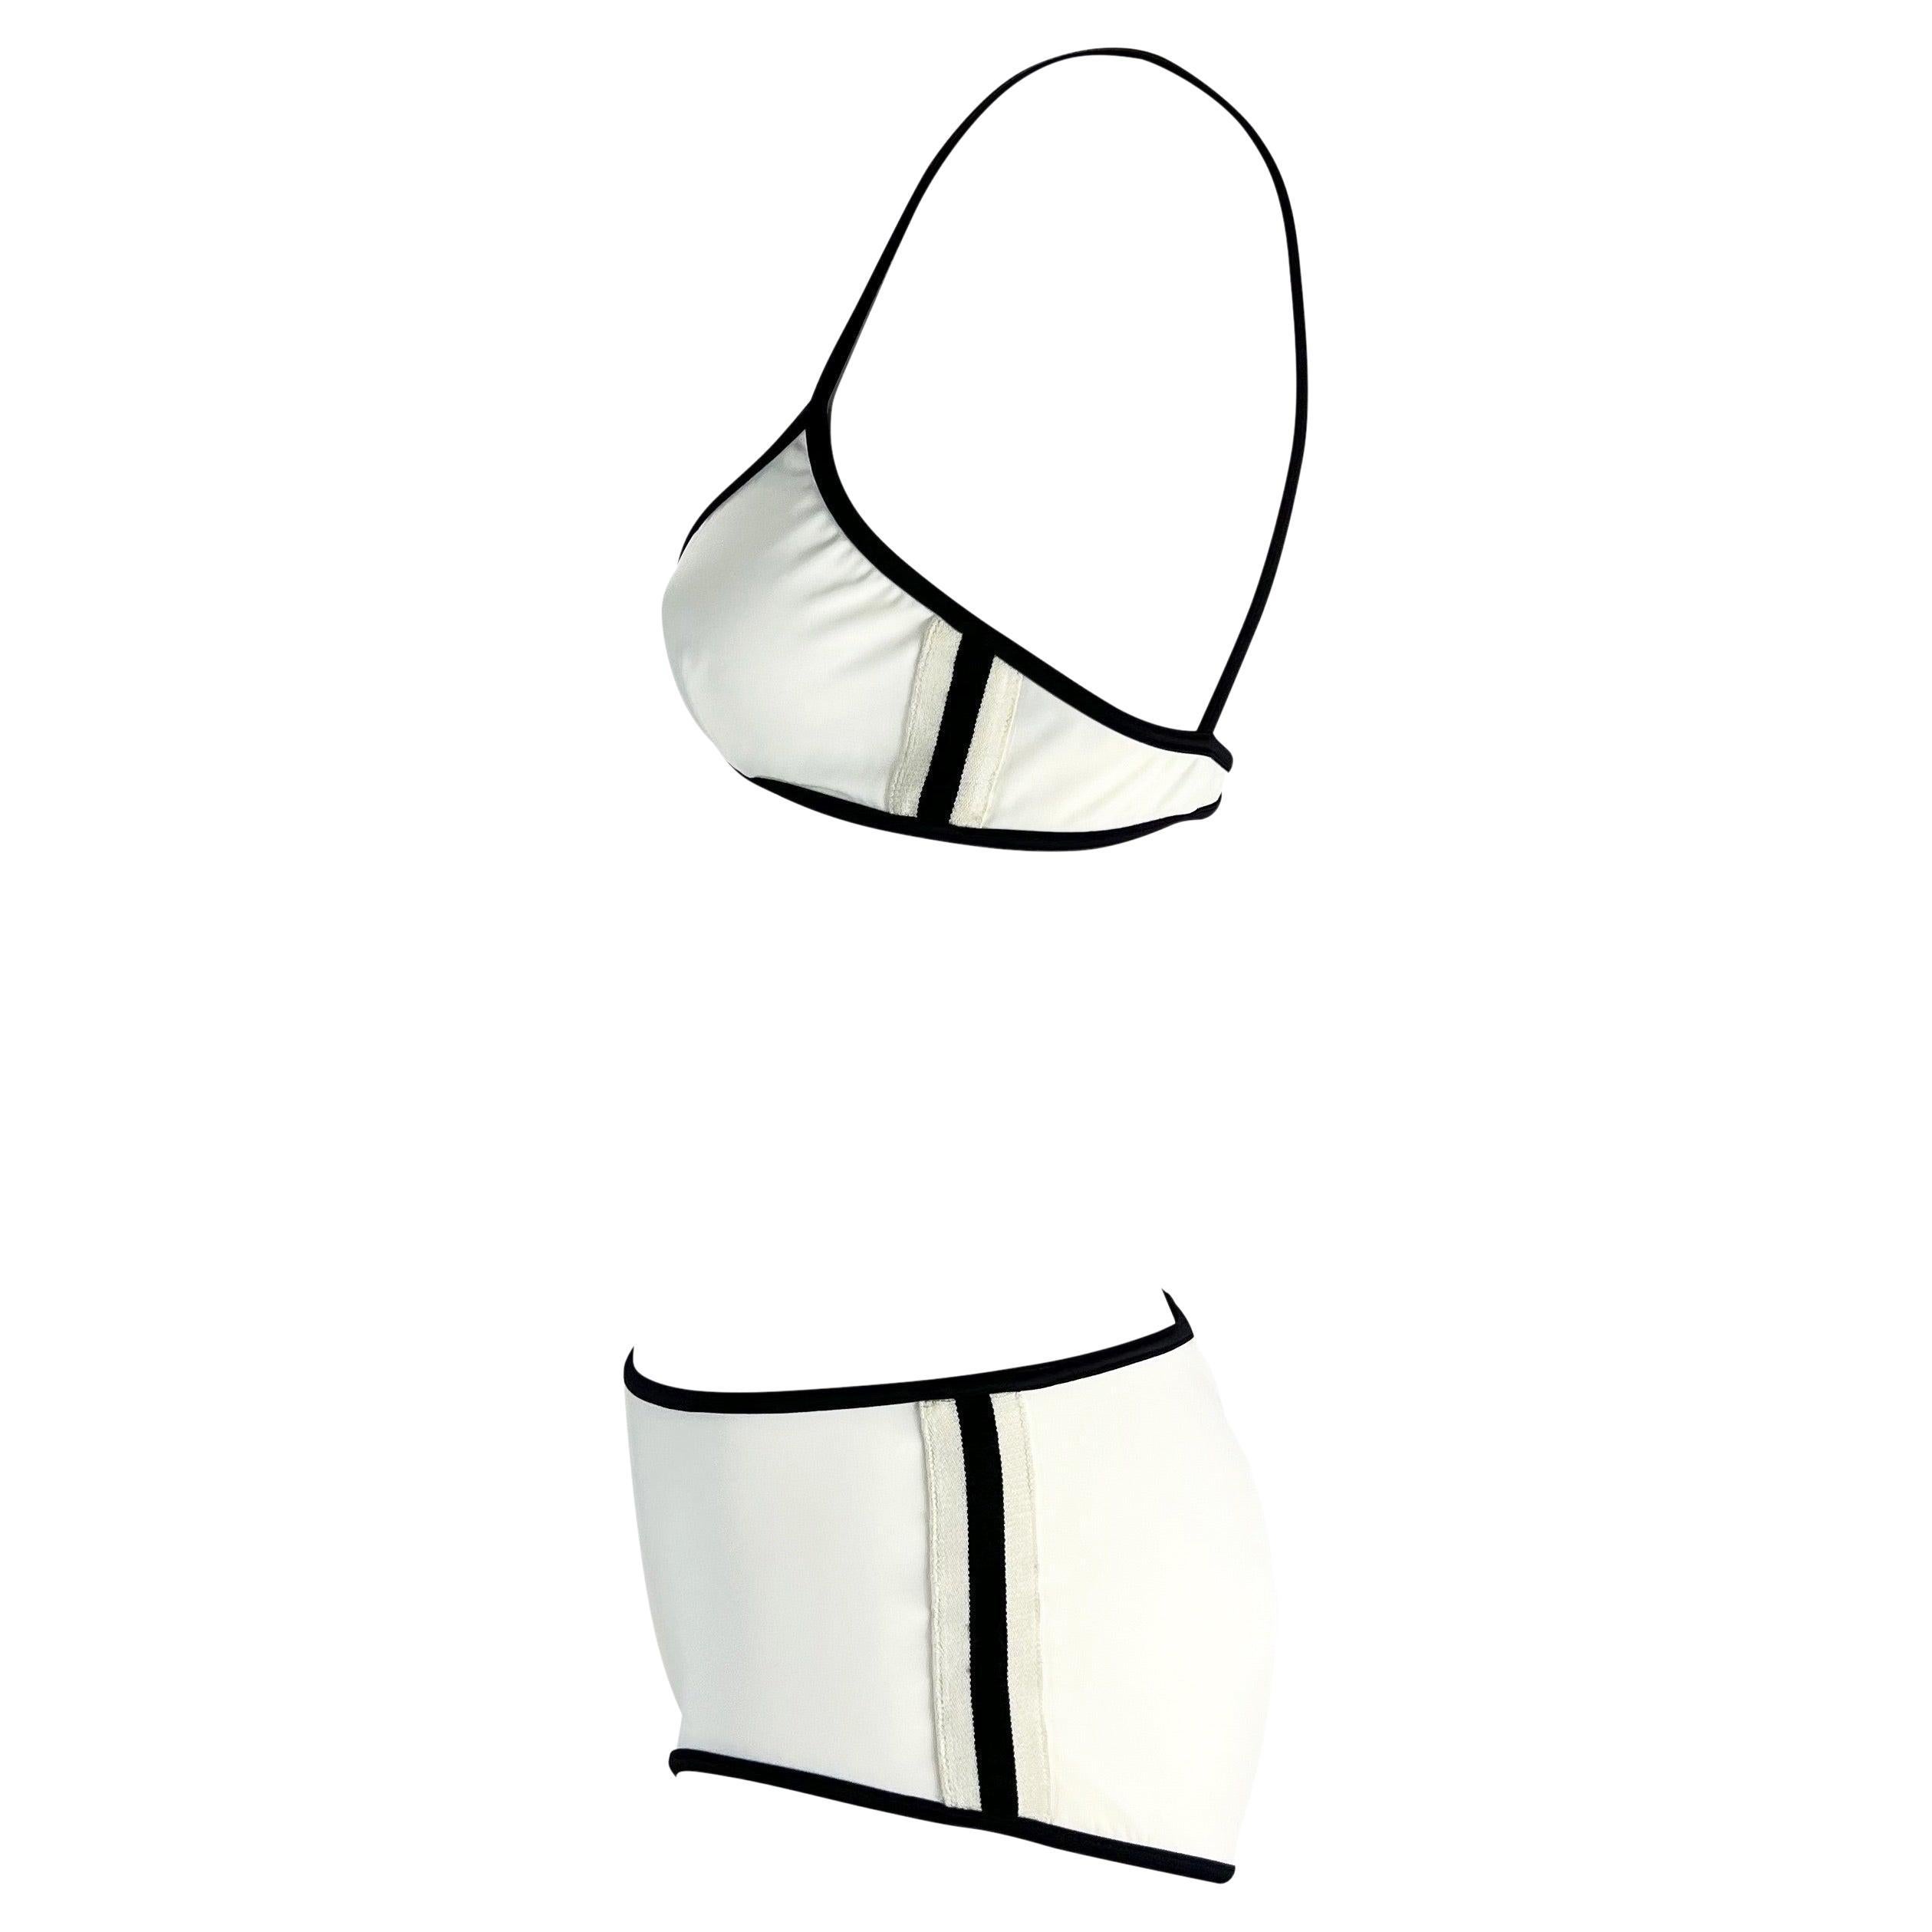 This chic Gucci bikini set, designed by Tom Ford, is from the Spring/Summer 2001 collection. The set features a triangle top and boy-short bottoms, both in a simple white with black vertical stripes on the sides. The top is secured with a silver